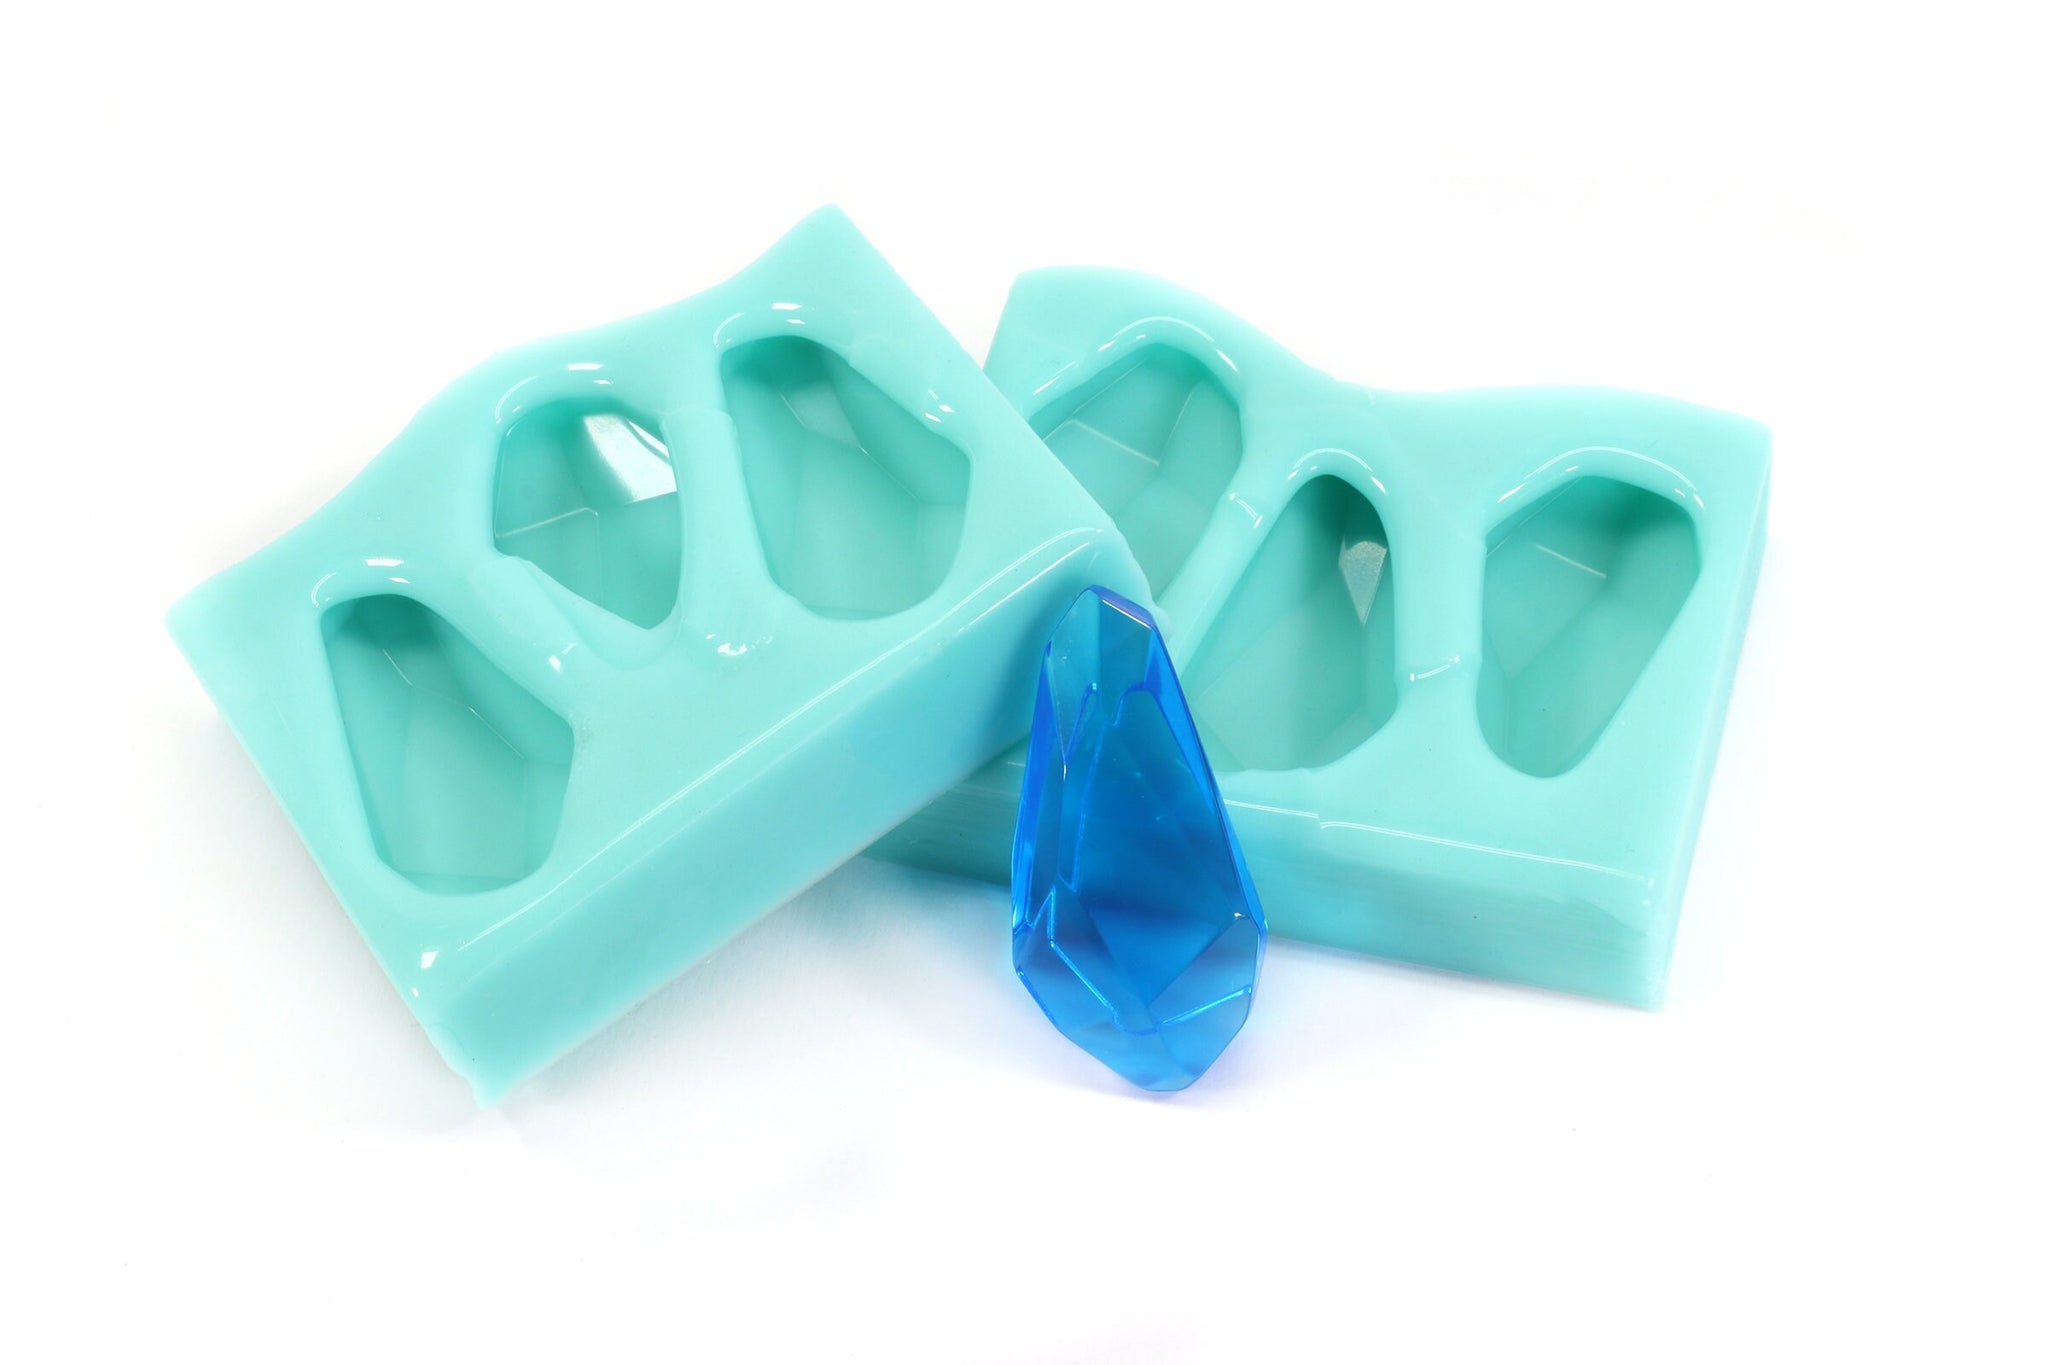 Teardrop Crystal - Silicone Mold for Resin, Crystal Earring mold, Crystal Crafts